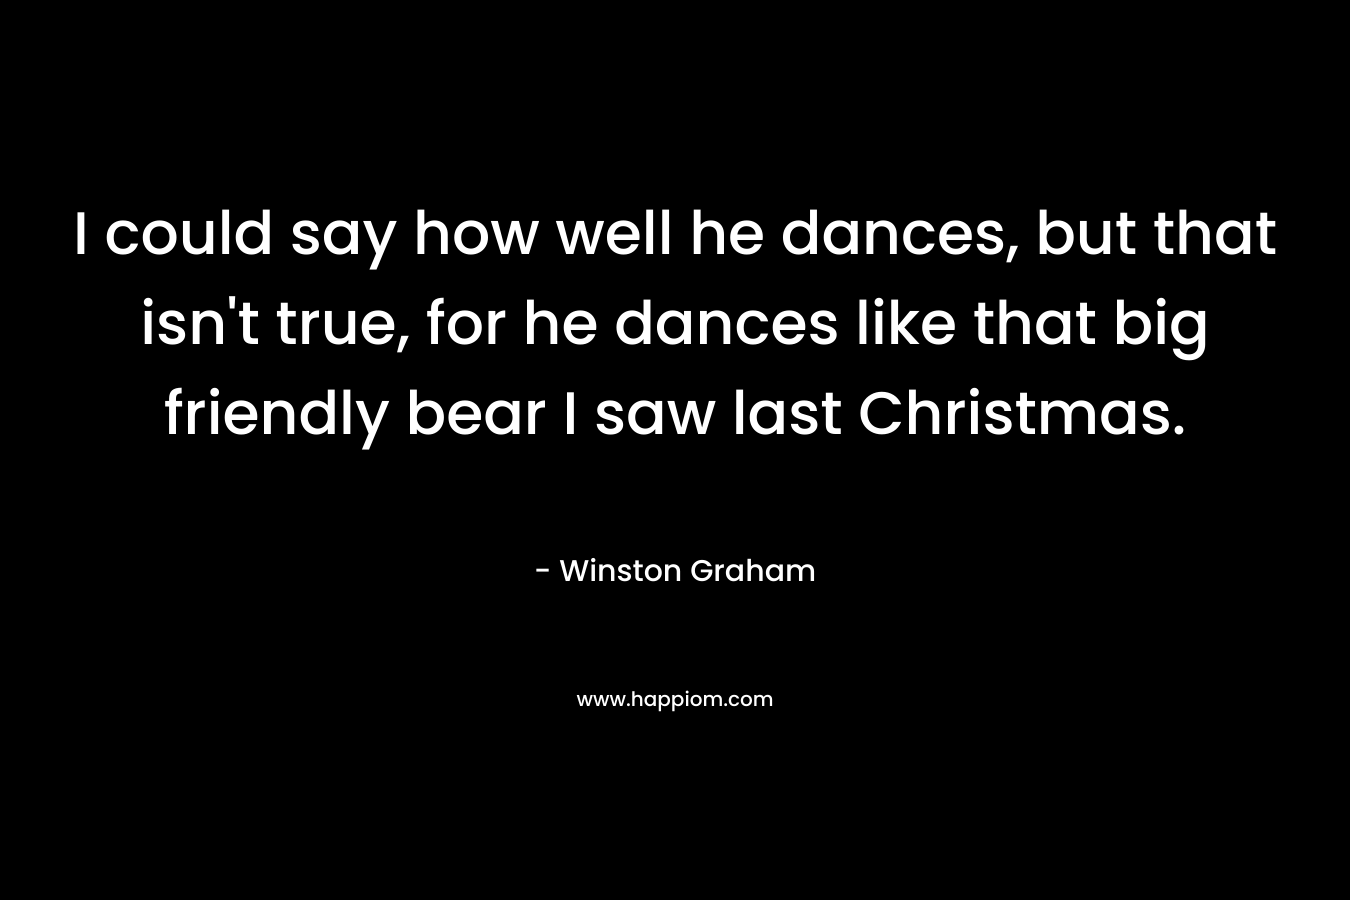 I could say how well he dances, but that isn't true, for he dances like that big friendly bear I saw last Christmas.